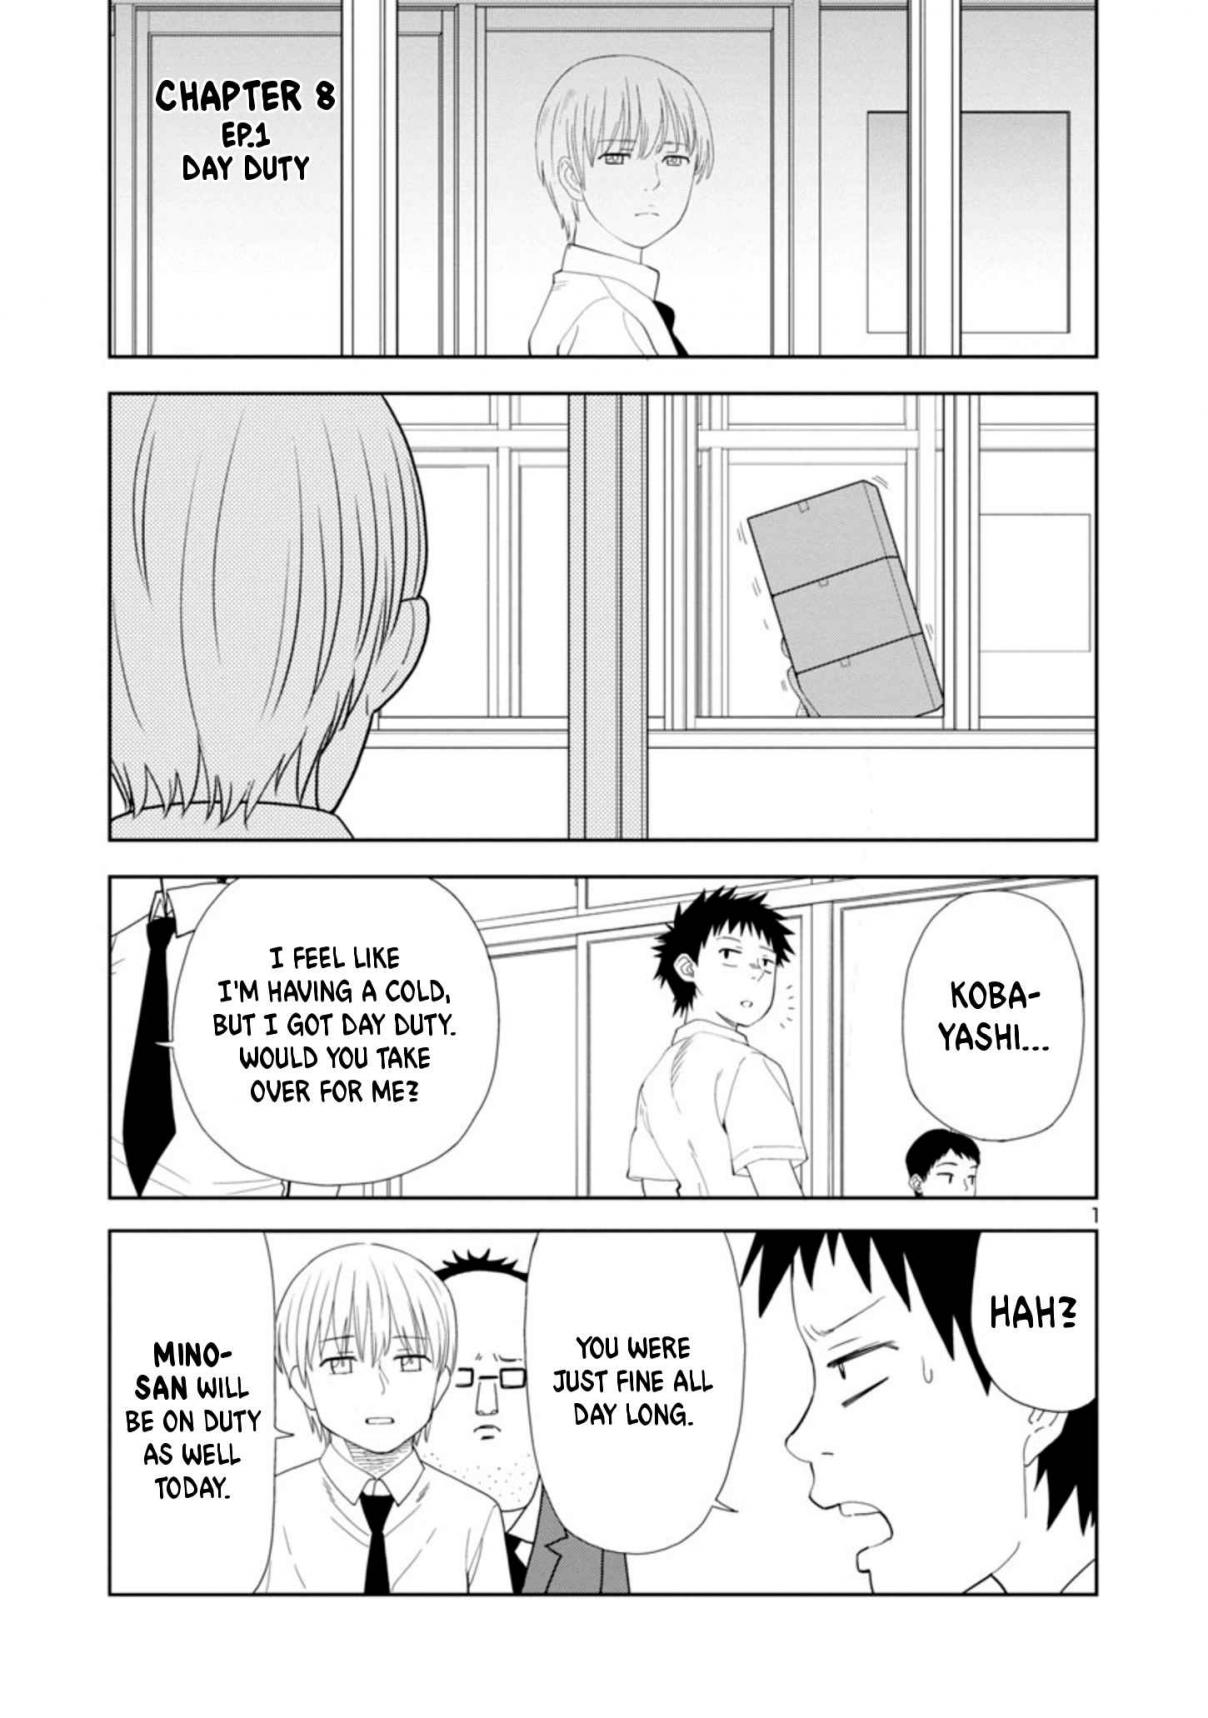 Is it okay to touch Mino san there? Ch. 8